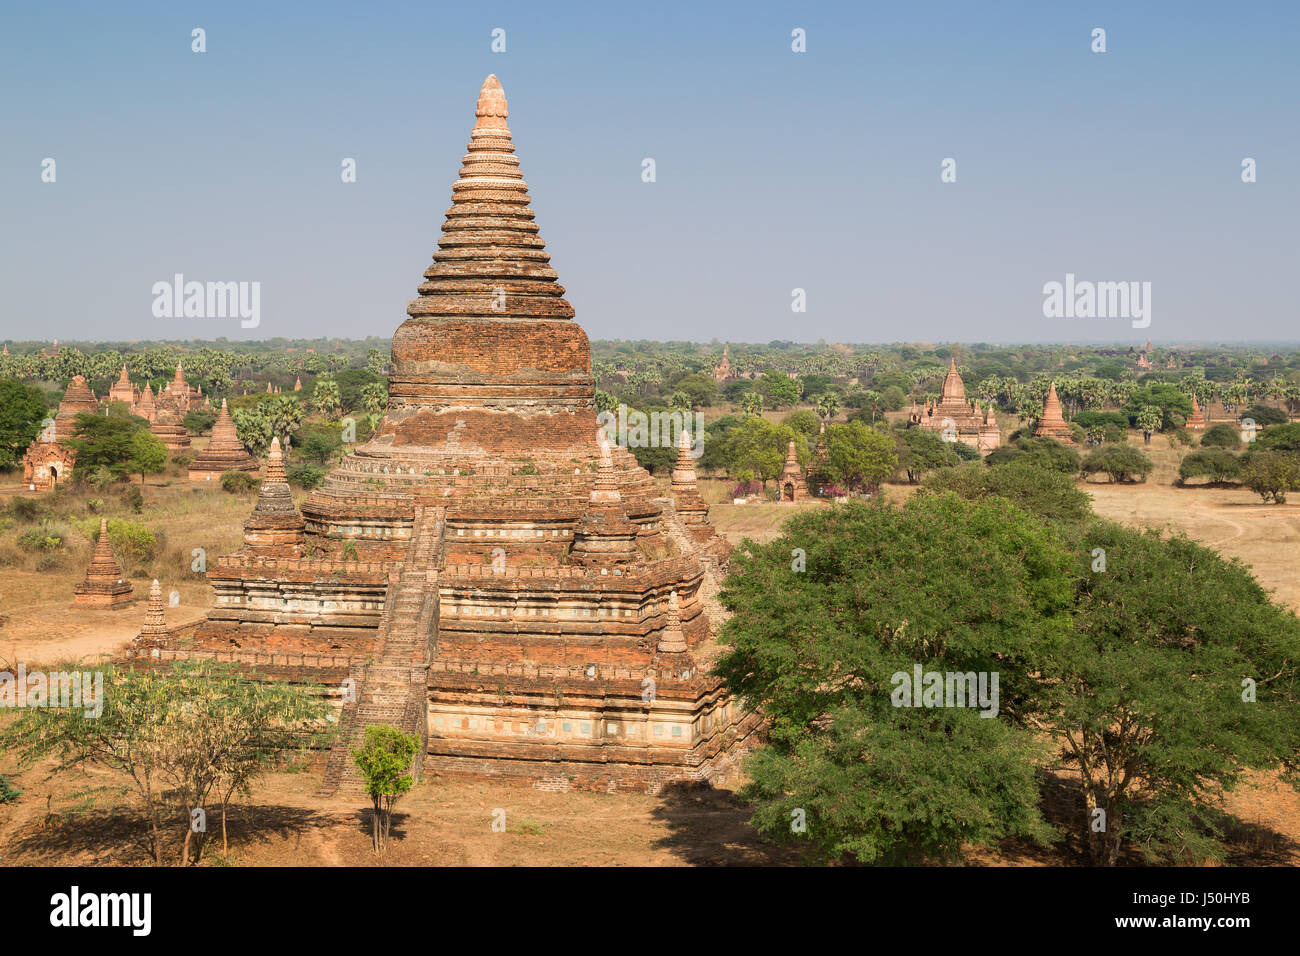 Many stupas, temples and pagodas in the ancient plain of Bagan in Myanmar (Burma), viewed from the Bulethi (Buledi) Temple. Stock Photo